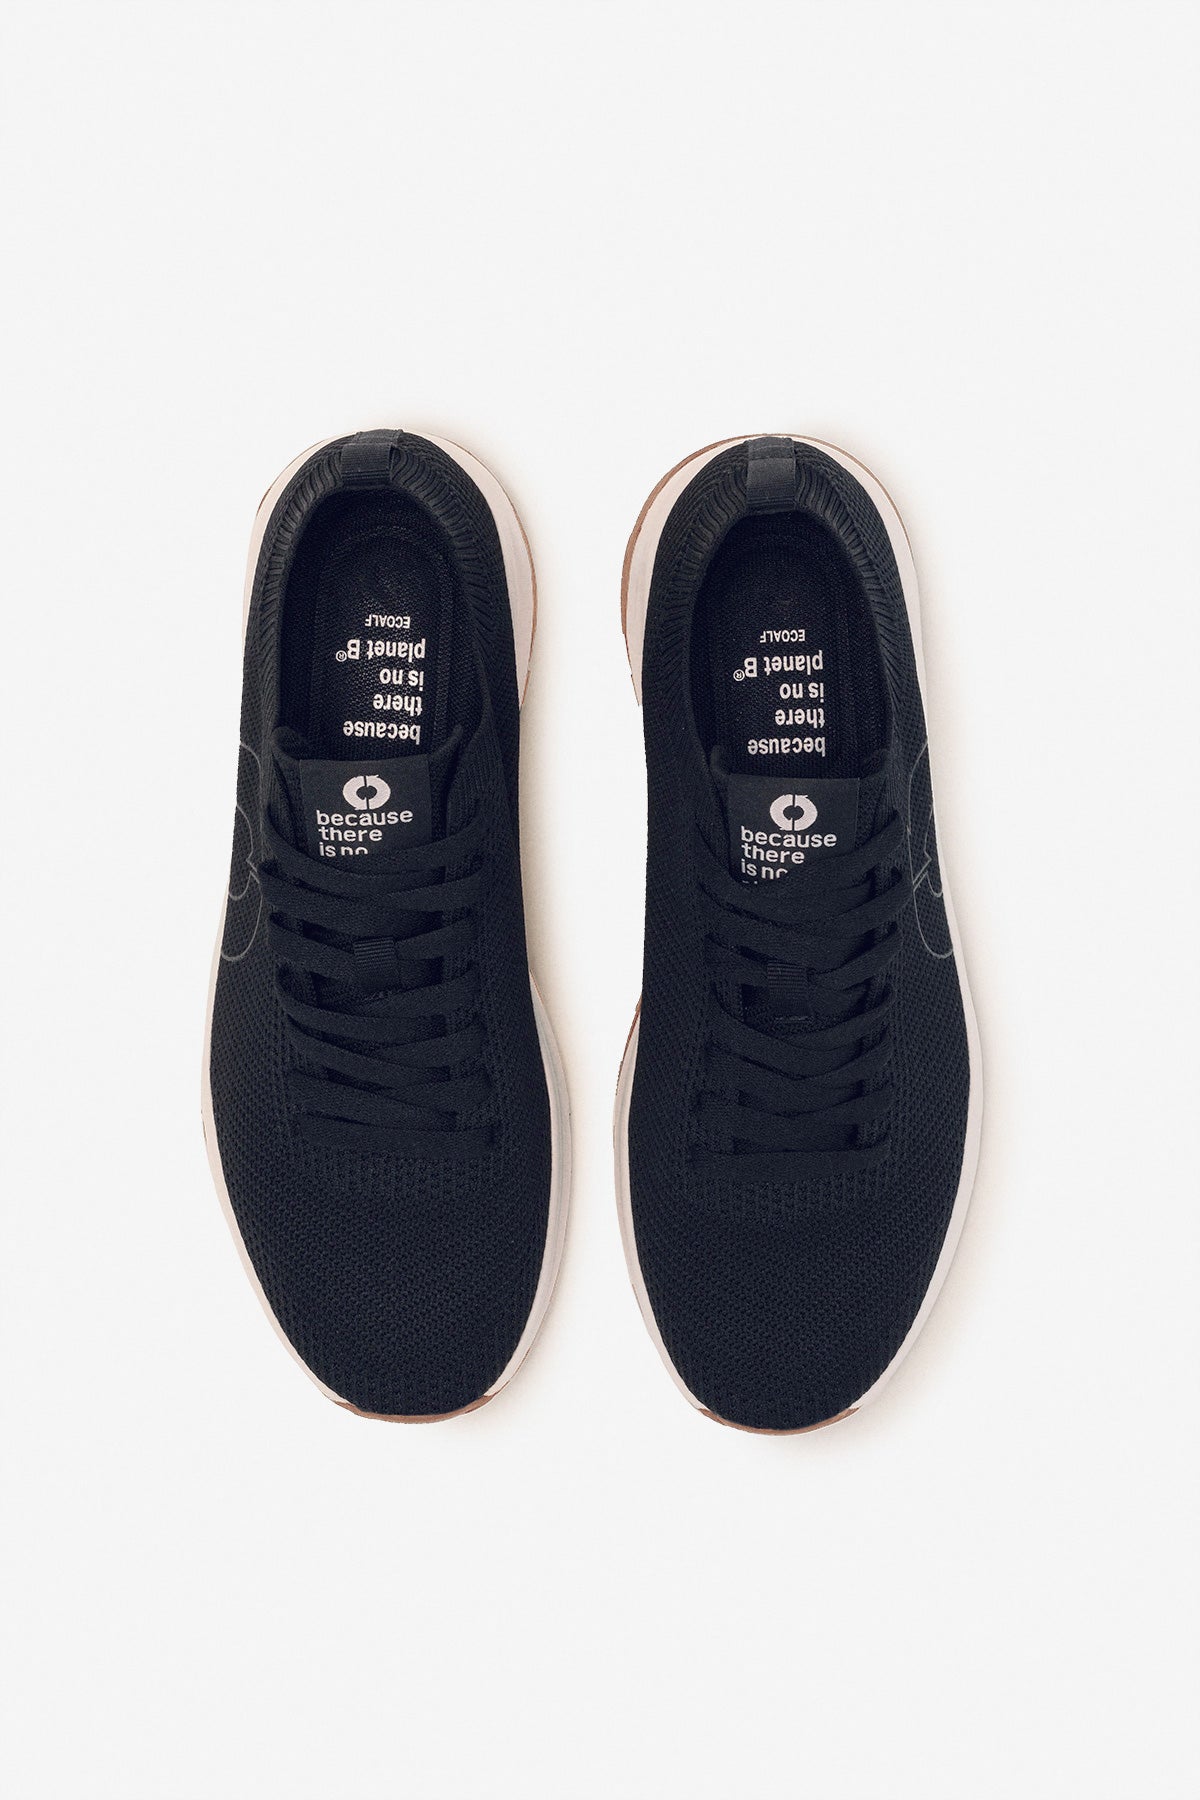 NAVY BLUE MADEIRA TRAINERS